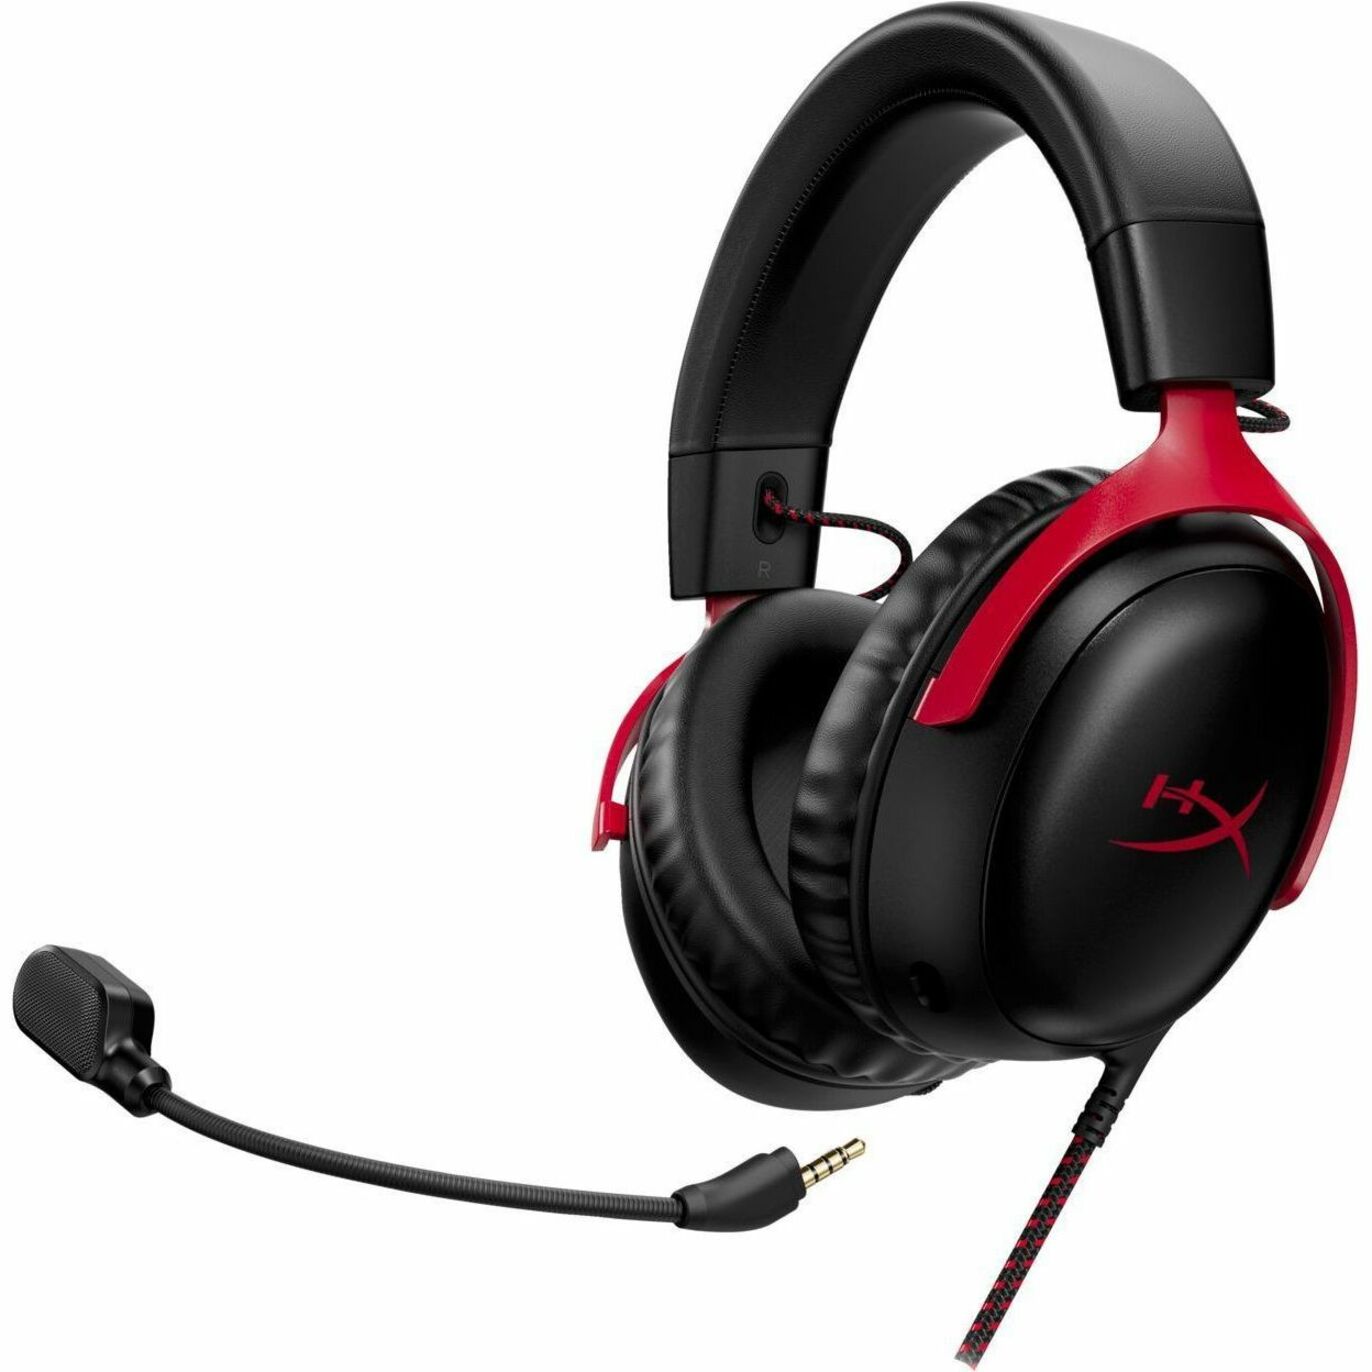 HyperX 727A9AA Cloud III Gaming Headset, Black/Red, DTS Headphone: X, Noise Cancelling